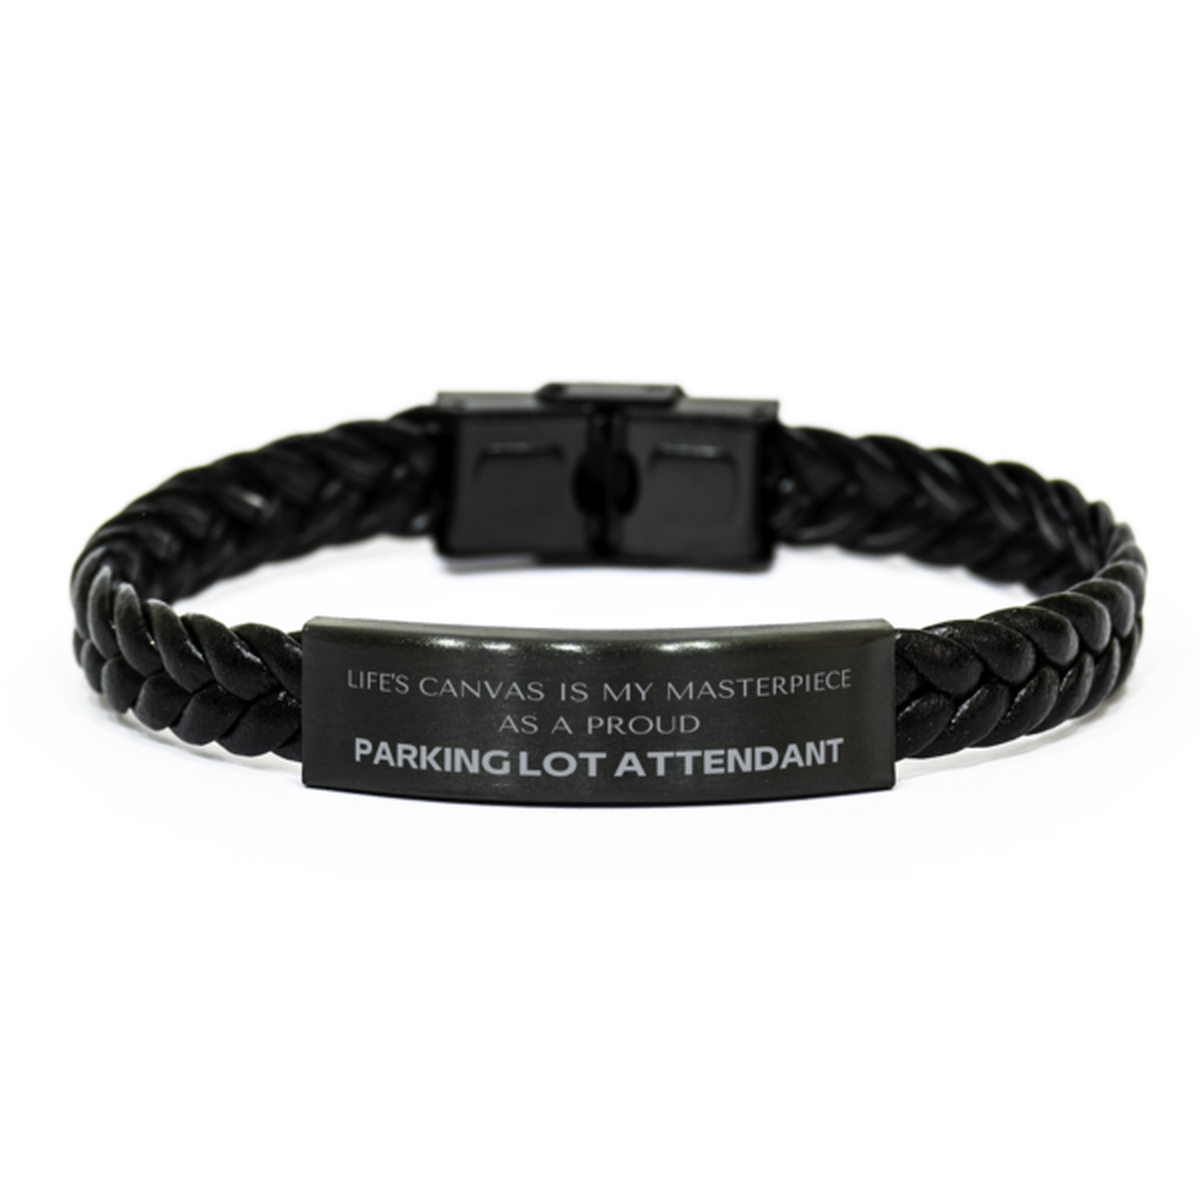 Proud Parking Lot Attendant Gifts, Life's canvas is my masterpiece, Epic Birthday Christmas Unique Braided Leather Bracelet For Parking Lot Attendant, Coworkers, Men, Women, Friends